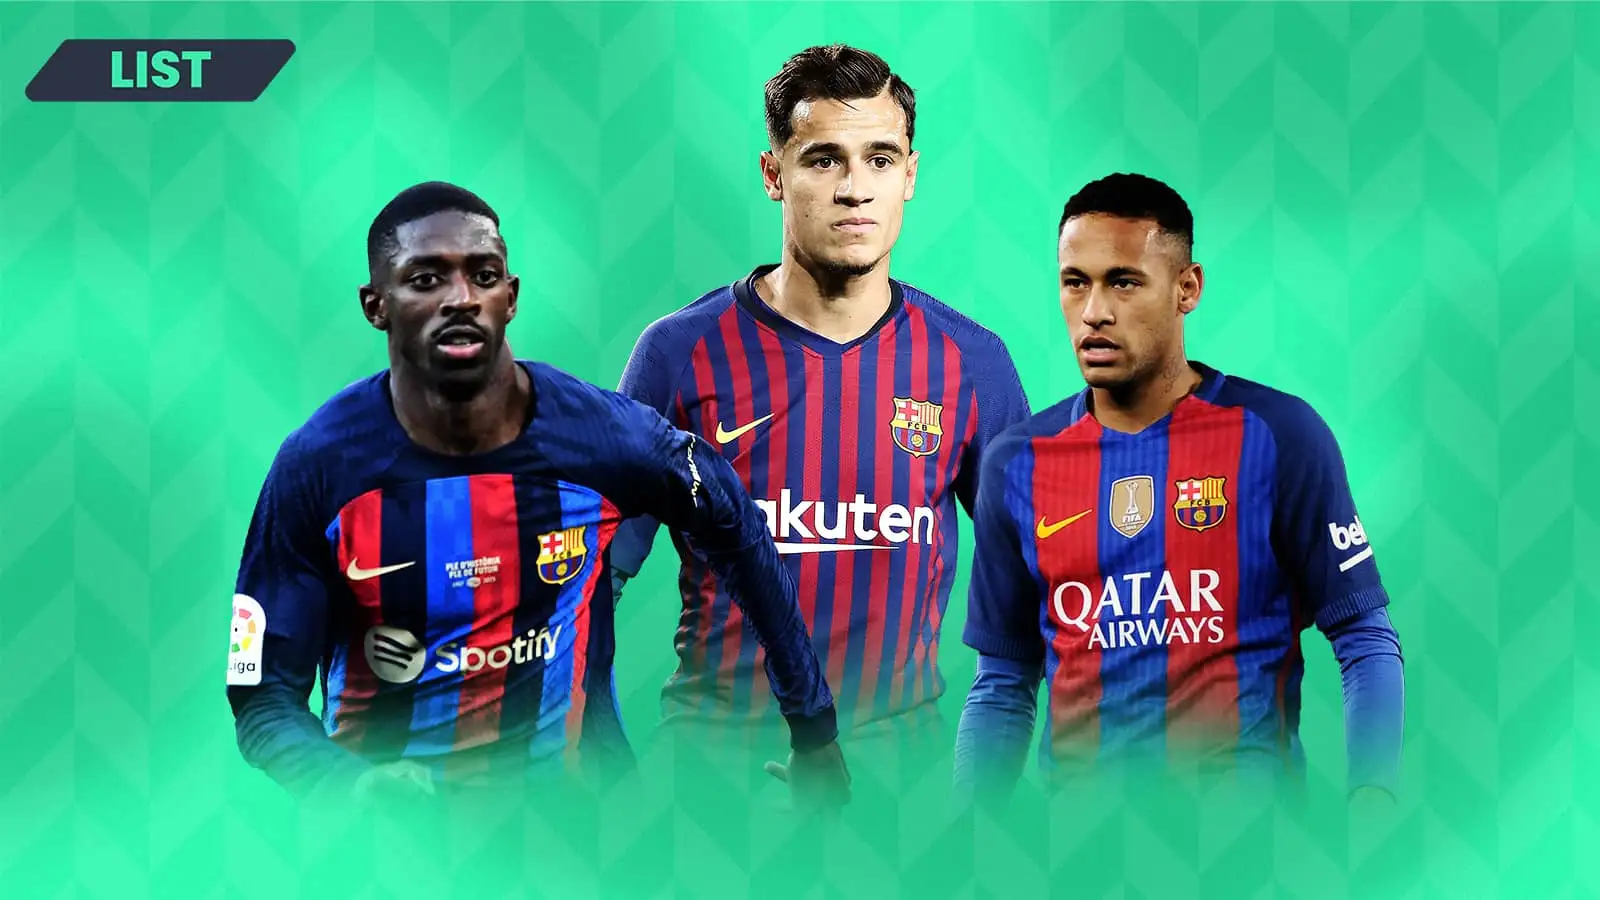 Top 10 most expensive transfers in history of winter transfer window